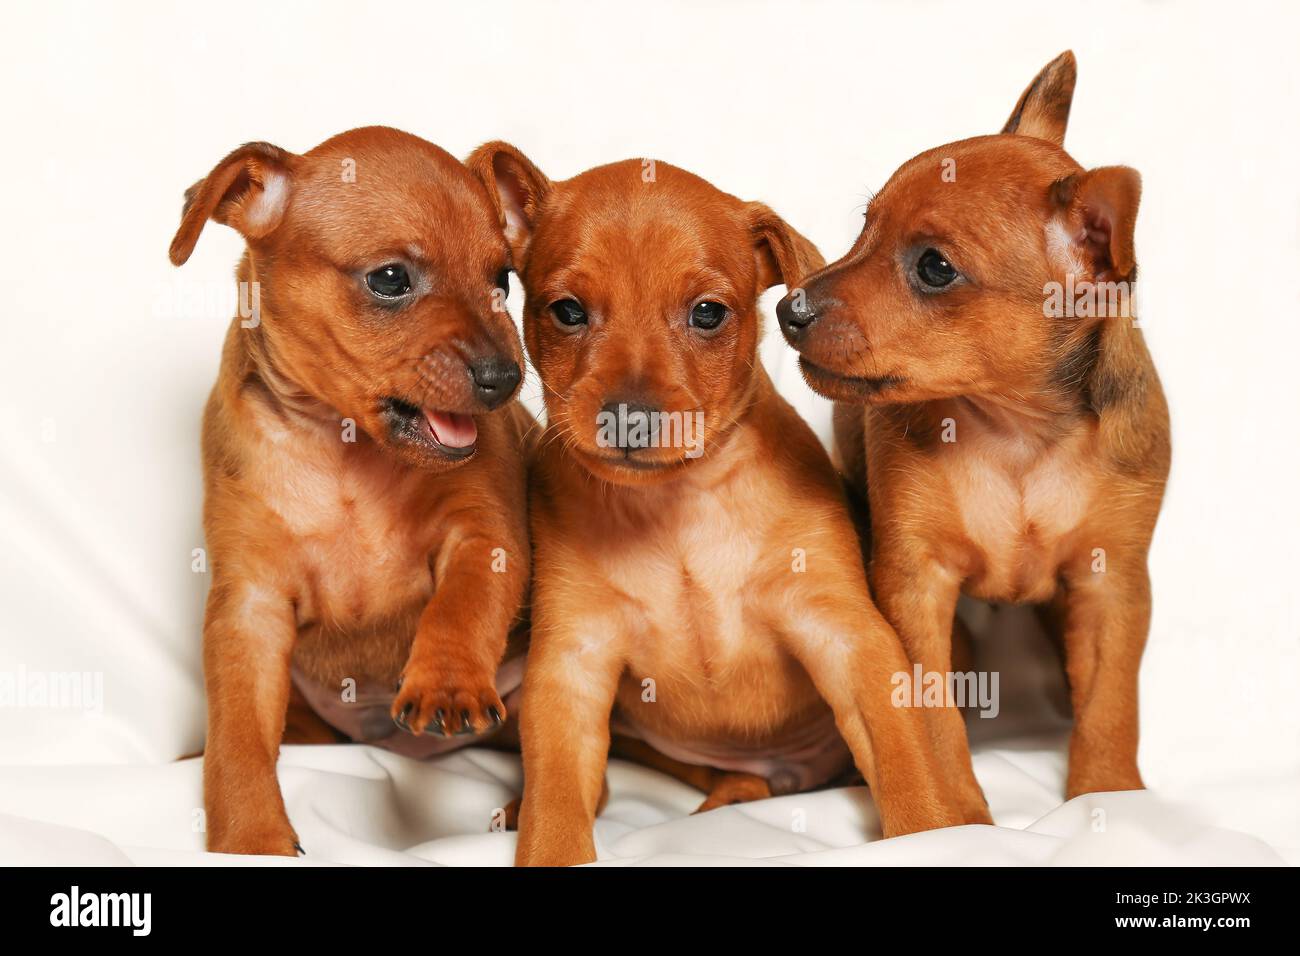 Three corinthian puppies are sitting on a white background. Little dogs. Mini pinscher puppies. Baby animals. Adorable pets. Stock Photo